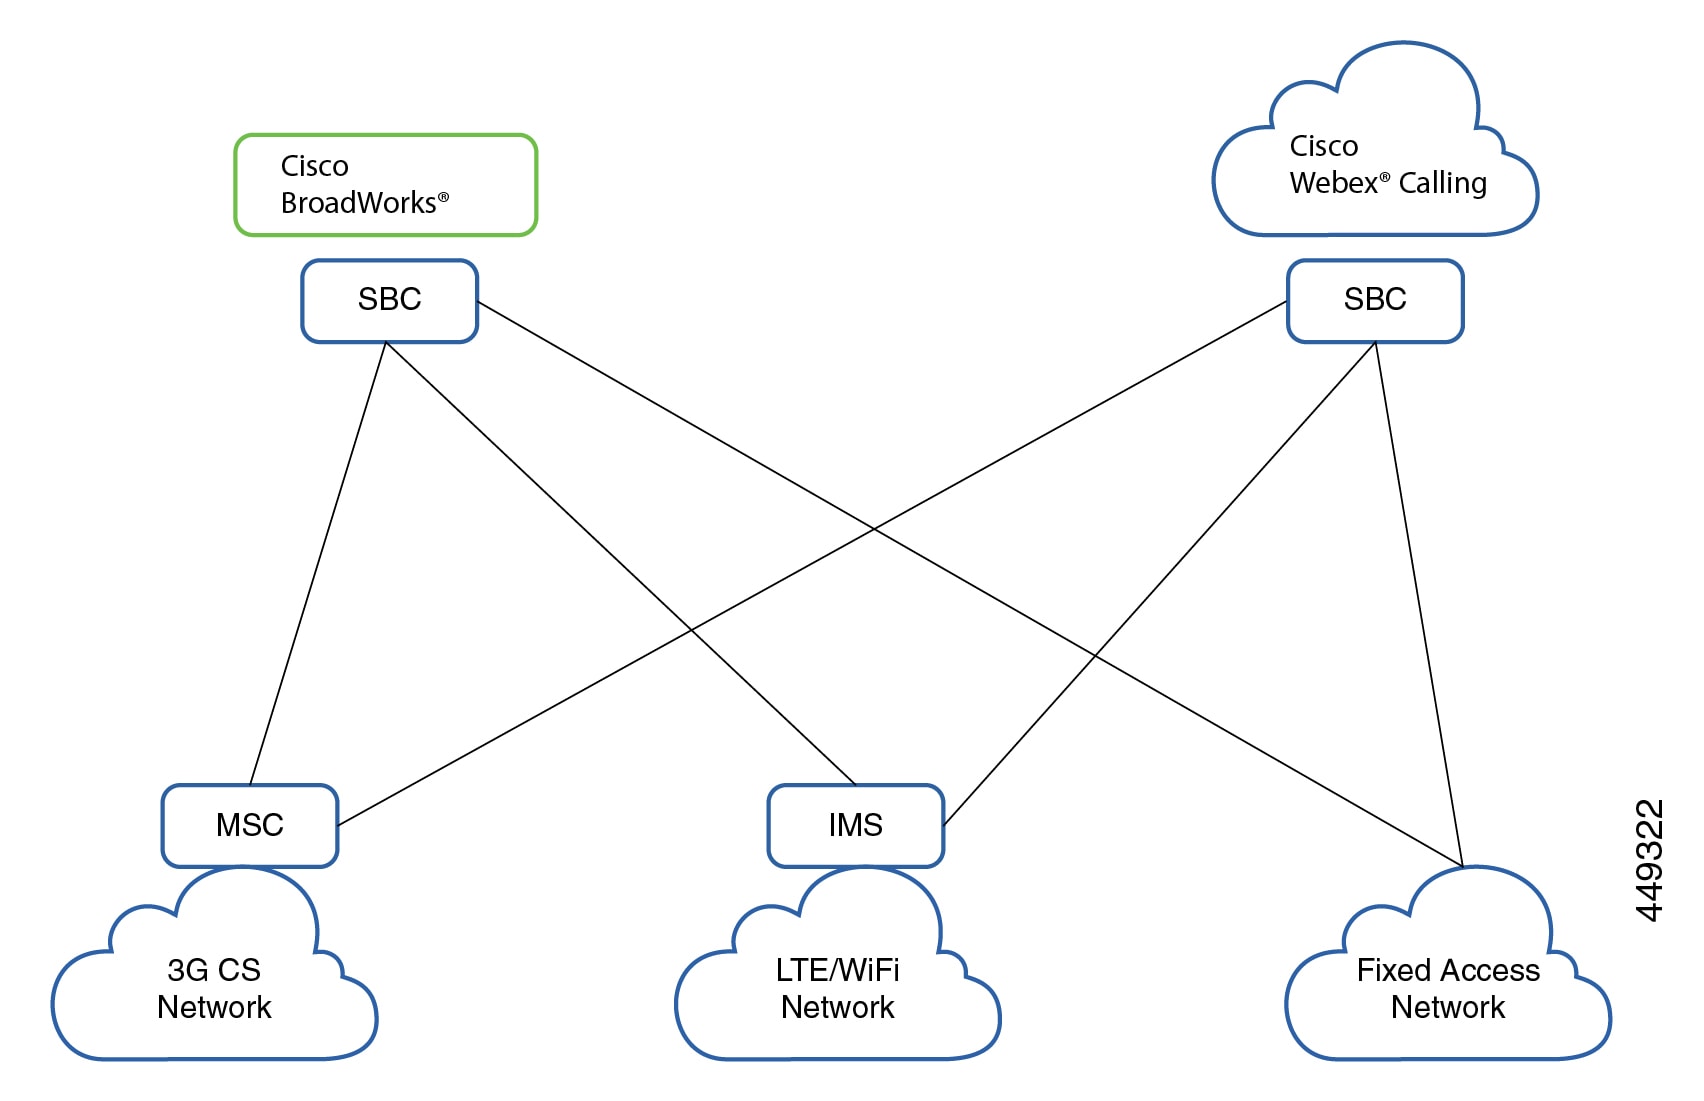 Integration Model Diagram for 3G and VoLTE Peering